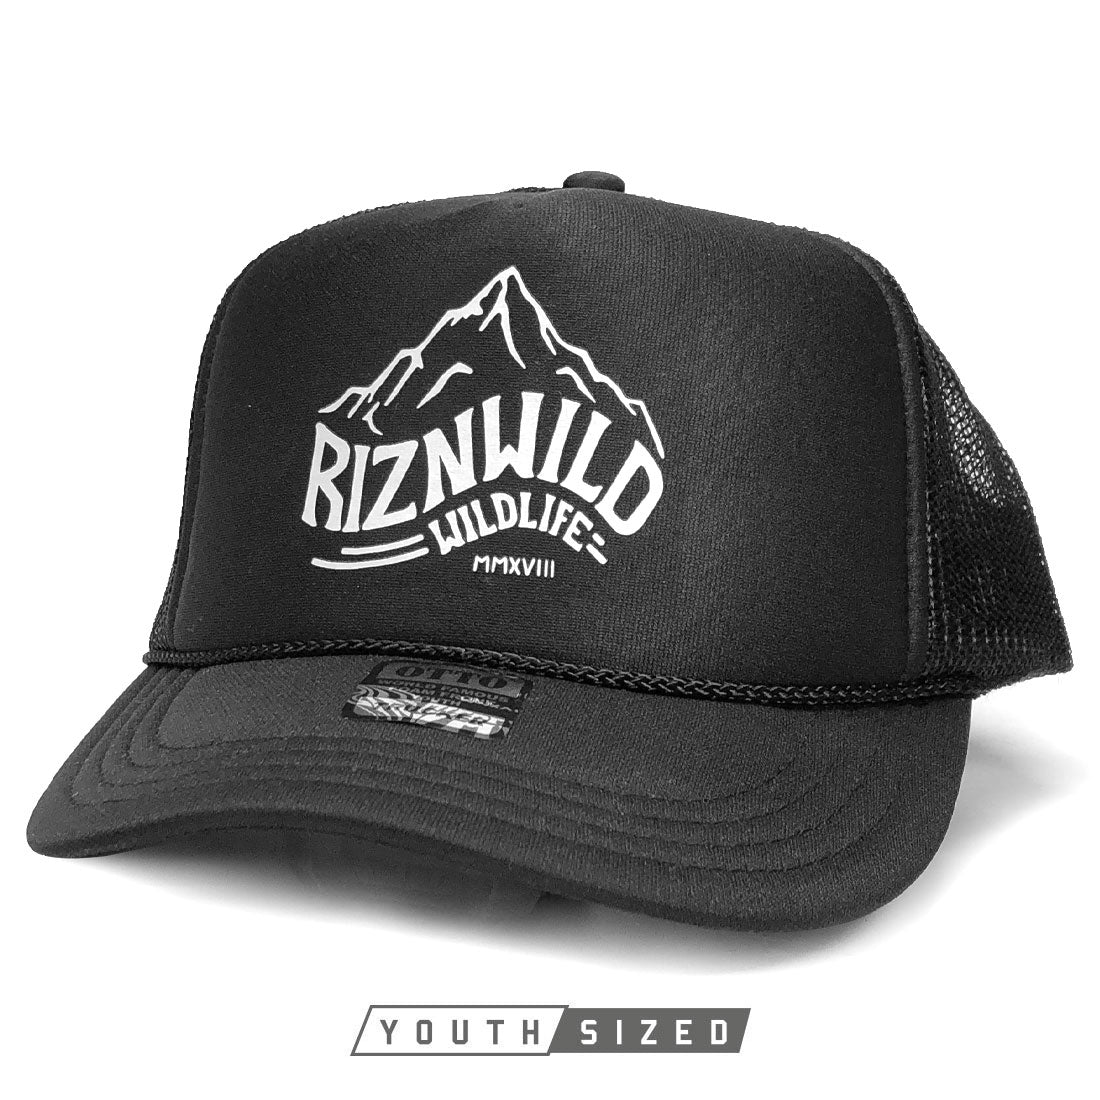 ROCKIES YOUTH CURVED BILL TRUCKER HAT IN BLACK